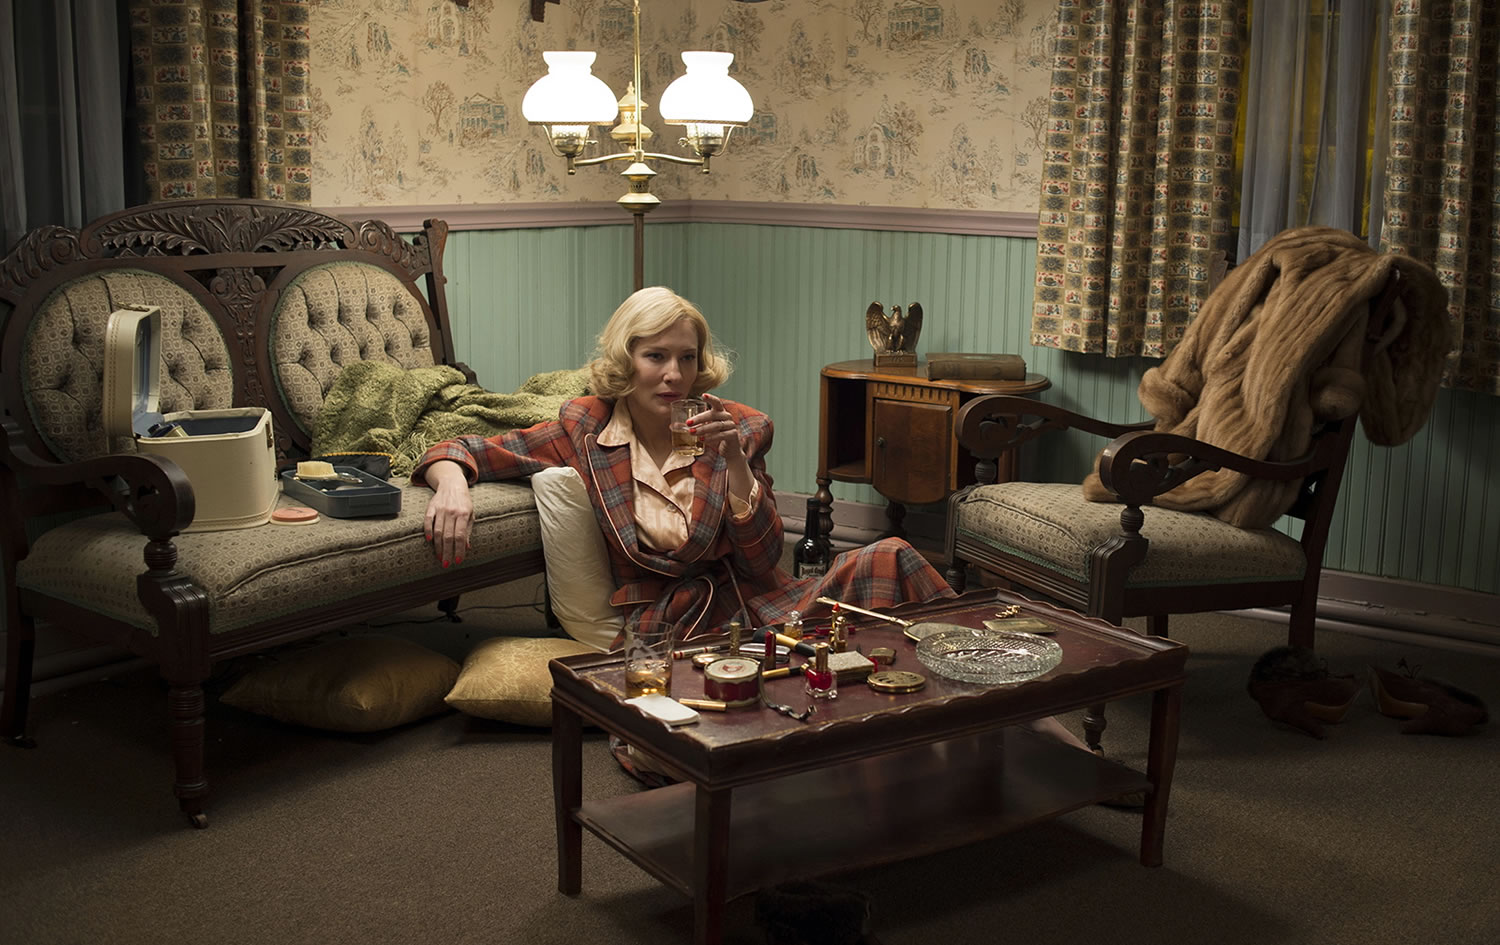 Cate Blanchett portrays the title character in &quot;Carol,&quot; one of a recent spate of films set in the 1950s.